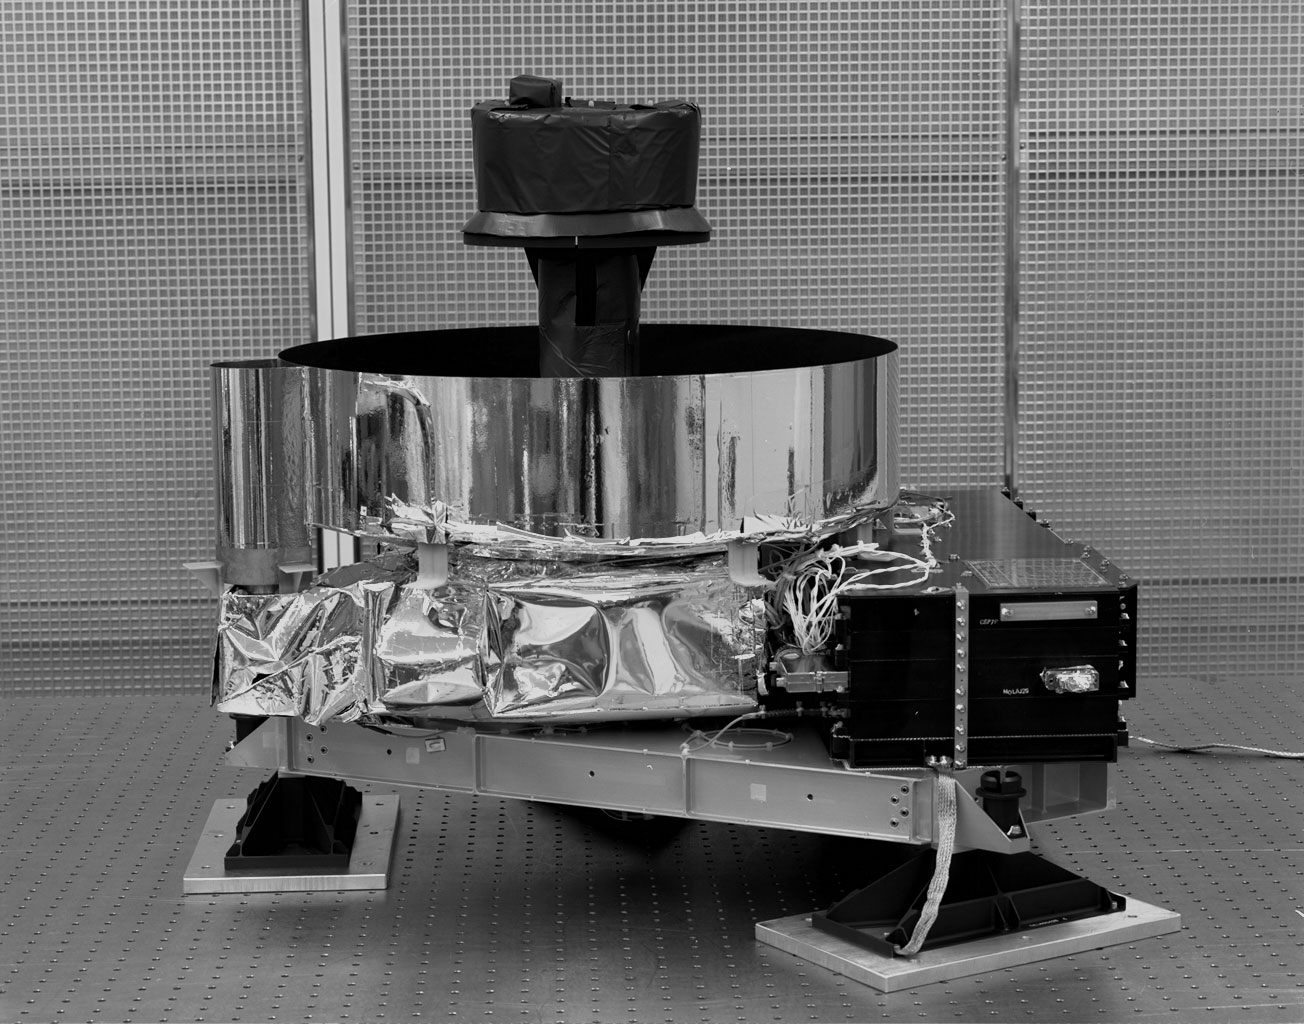 A black-and-white photo of a science instrument, consisting of a metal platform elevated atop three retangular feet. Above the platform rises a squat silver cylinder with an open top and mirrored outside. Sicking up from inside the cylinder is a black, mushroom-shaped element. The base of the cylinder is wrapped in silver foil, and a black box also rests on the platform, to the right.